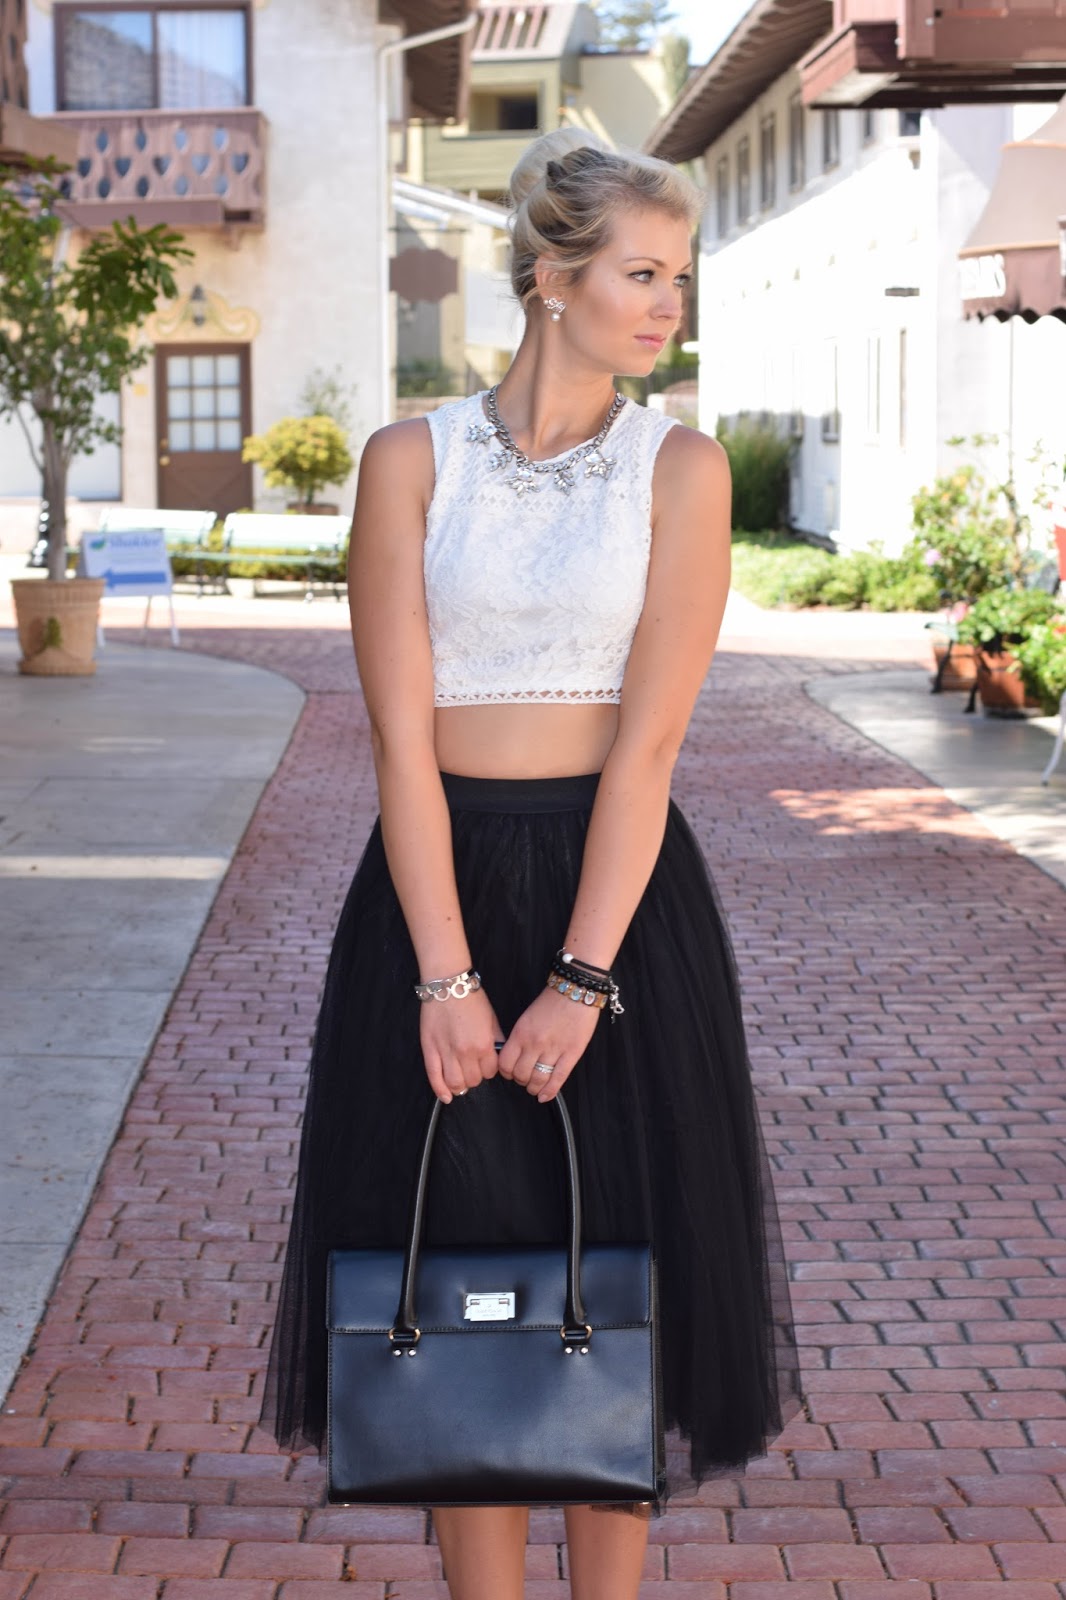 zaful skirt, tulle skirt, how to wear tulle skirt, how to style tulle skirt, corp top, kate spade, kate spade purse, tulle